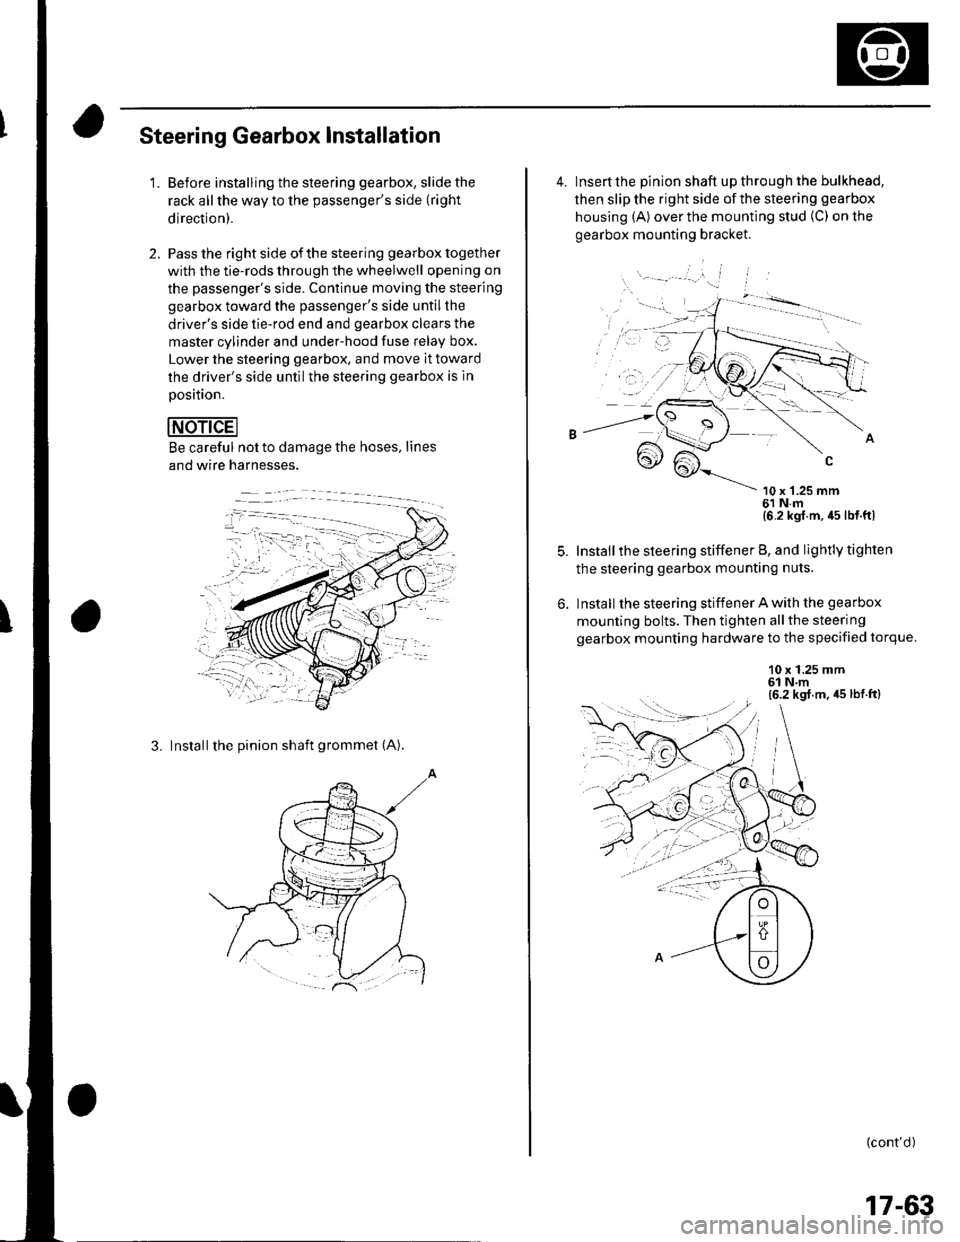 HONDA CIVIC 2003 7.G Workshop Manual Steering Gearbox Installation
2.
1.Before installing the steering gearbox, slide the
rack all the way to the passengers side (right
direction).
Pass the right side of the steering gearbox together
w